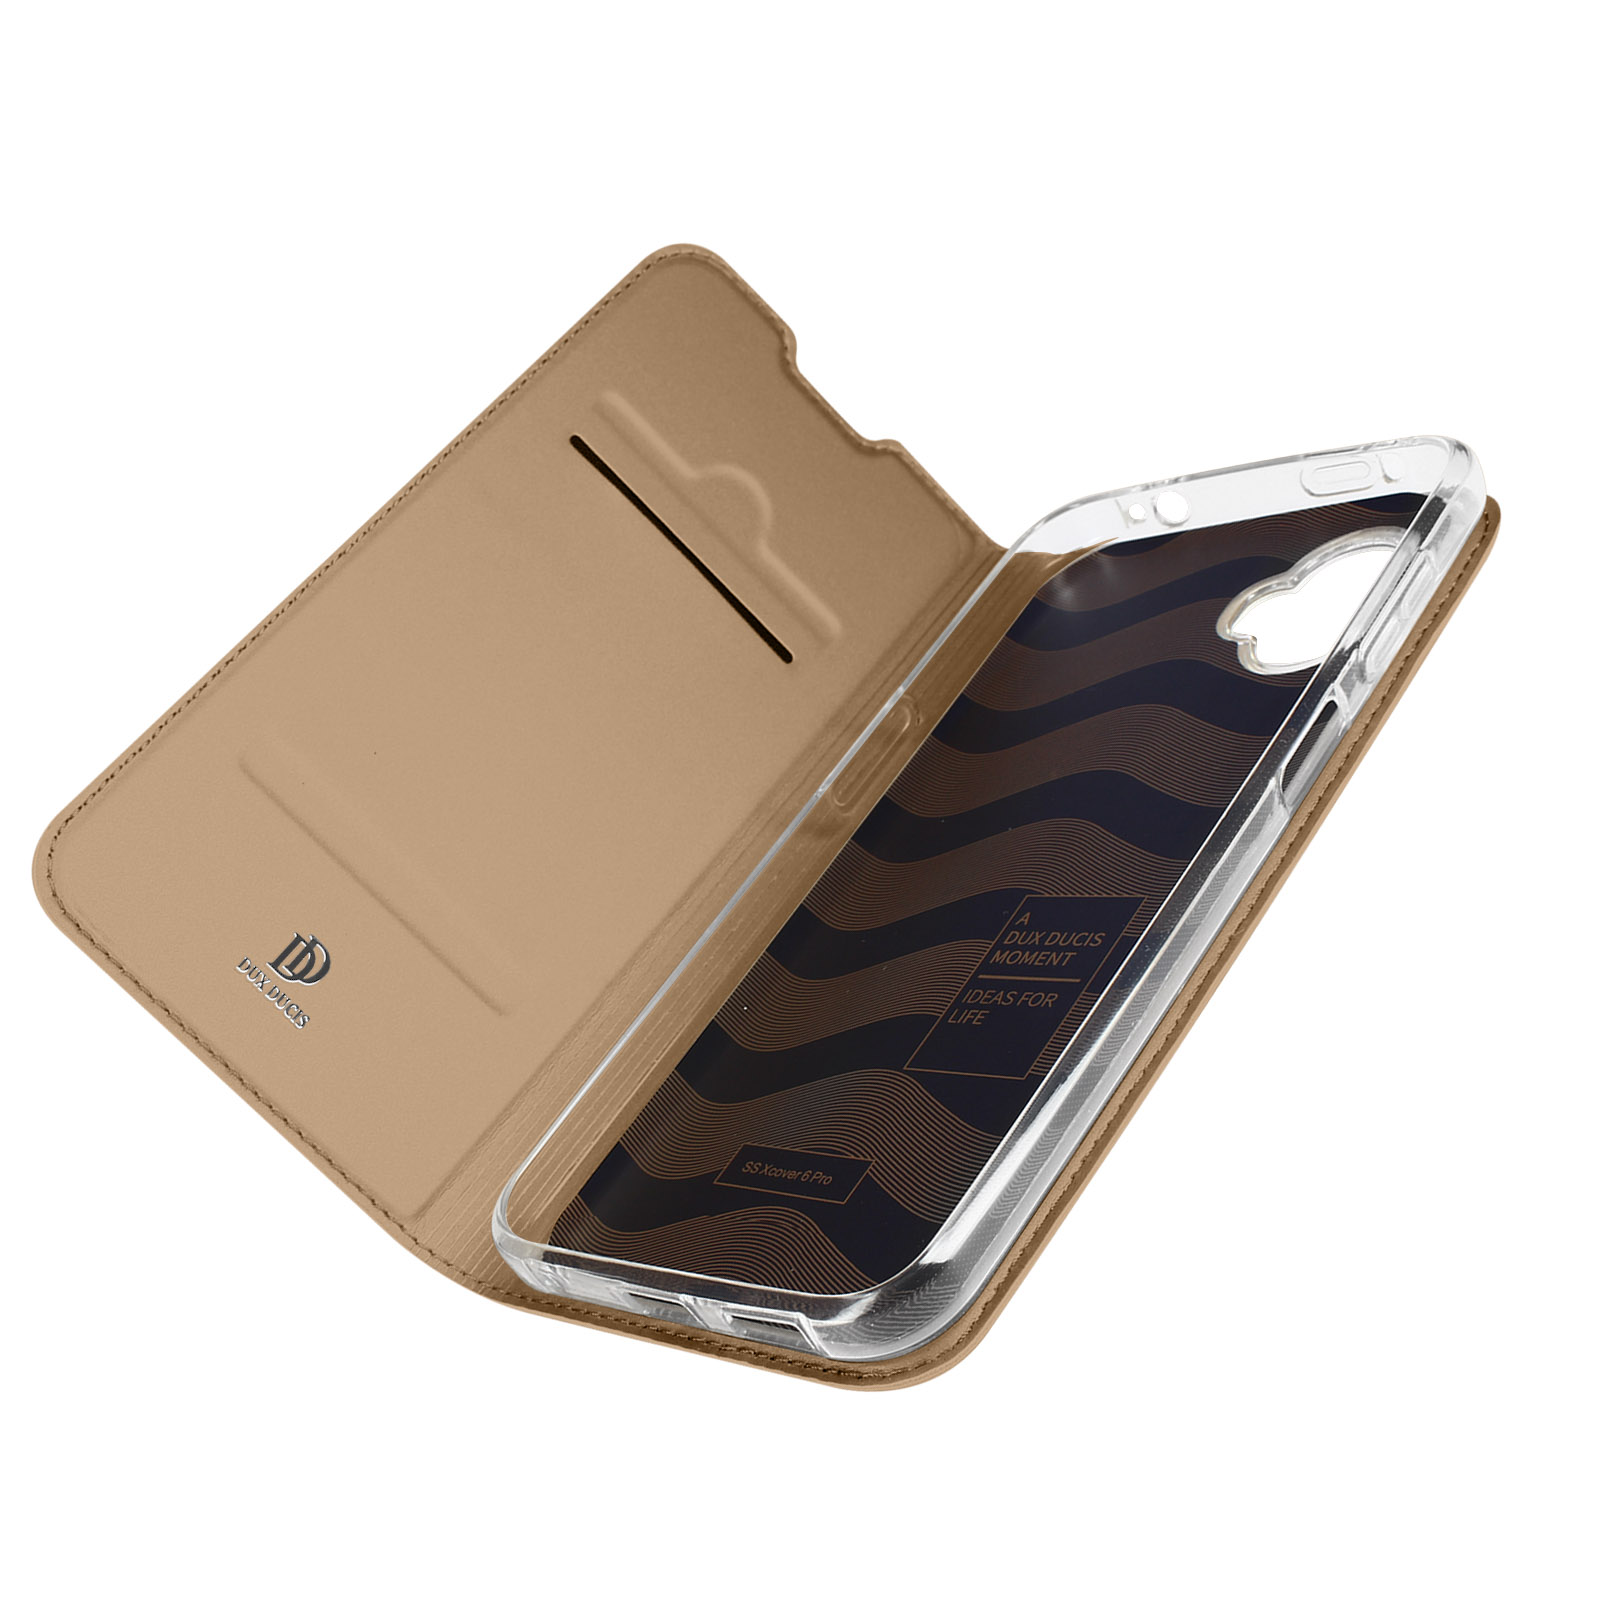 Pro, DUX Galaxy Xcover DUCIS Samsung, Rosegold Series, Bookcover, Pro 6